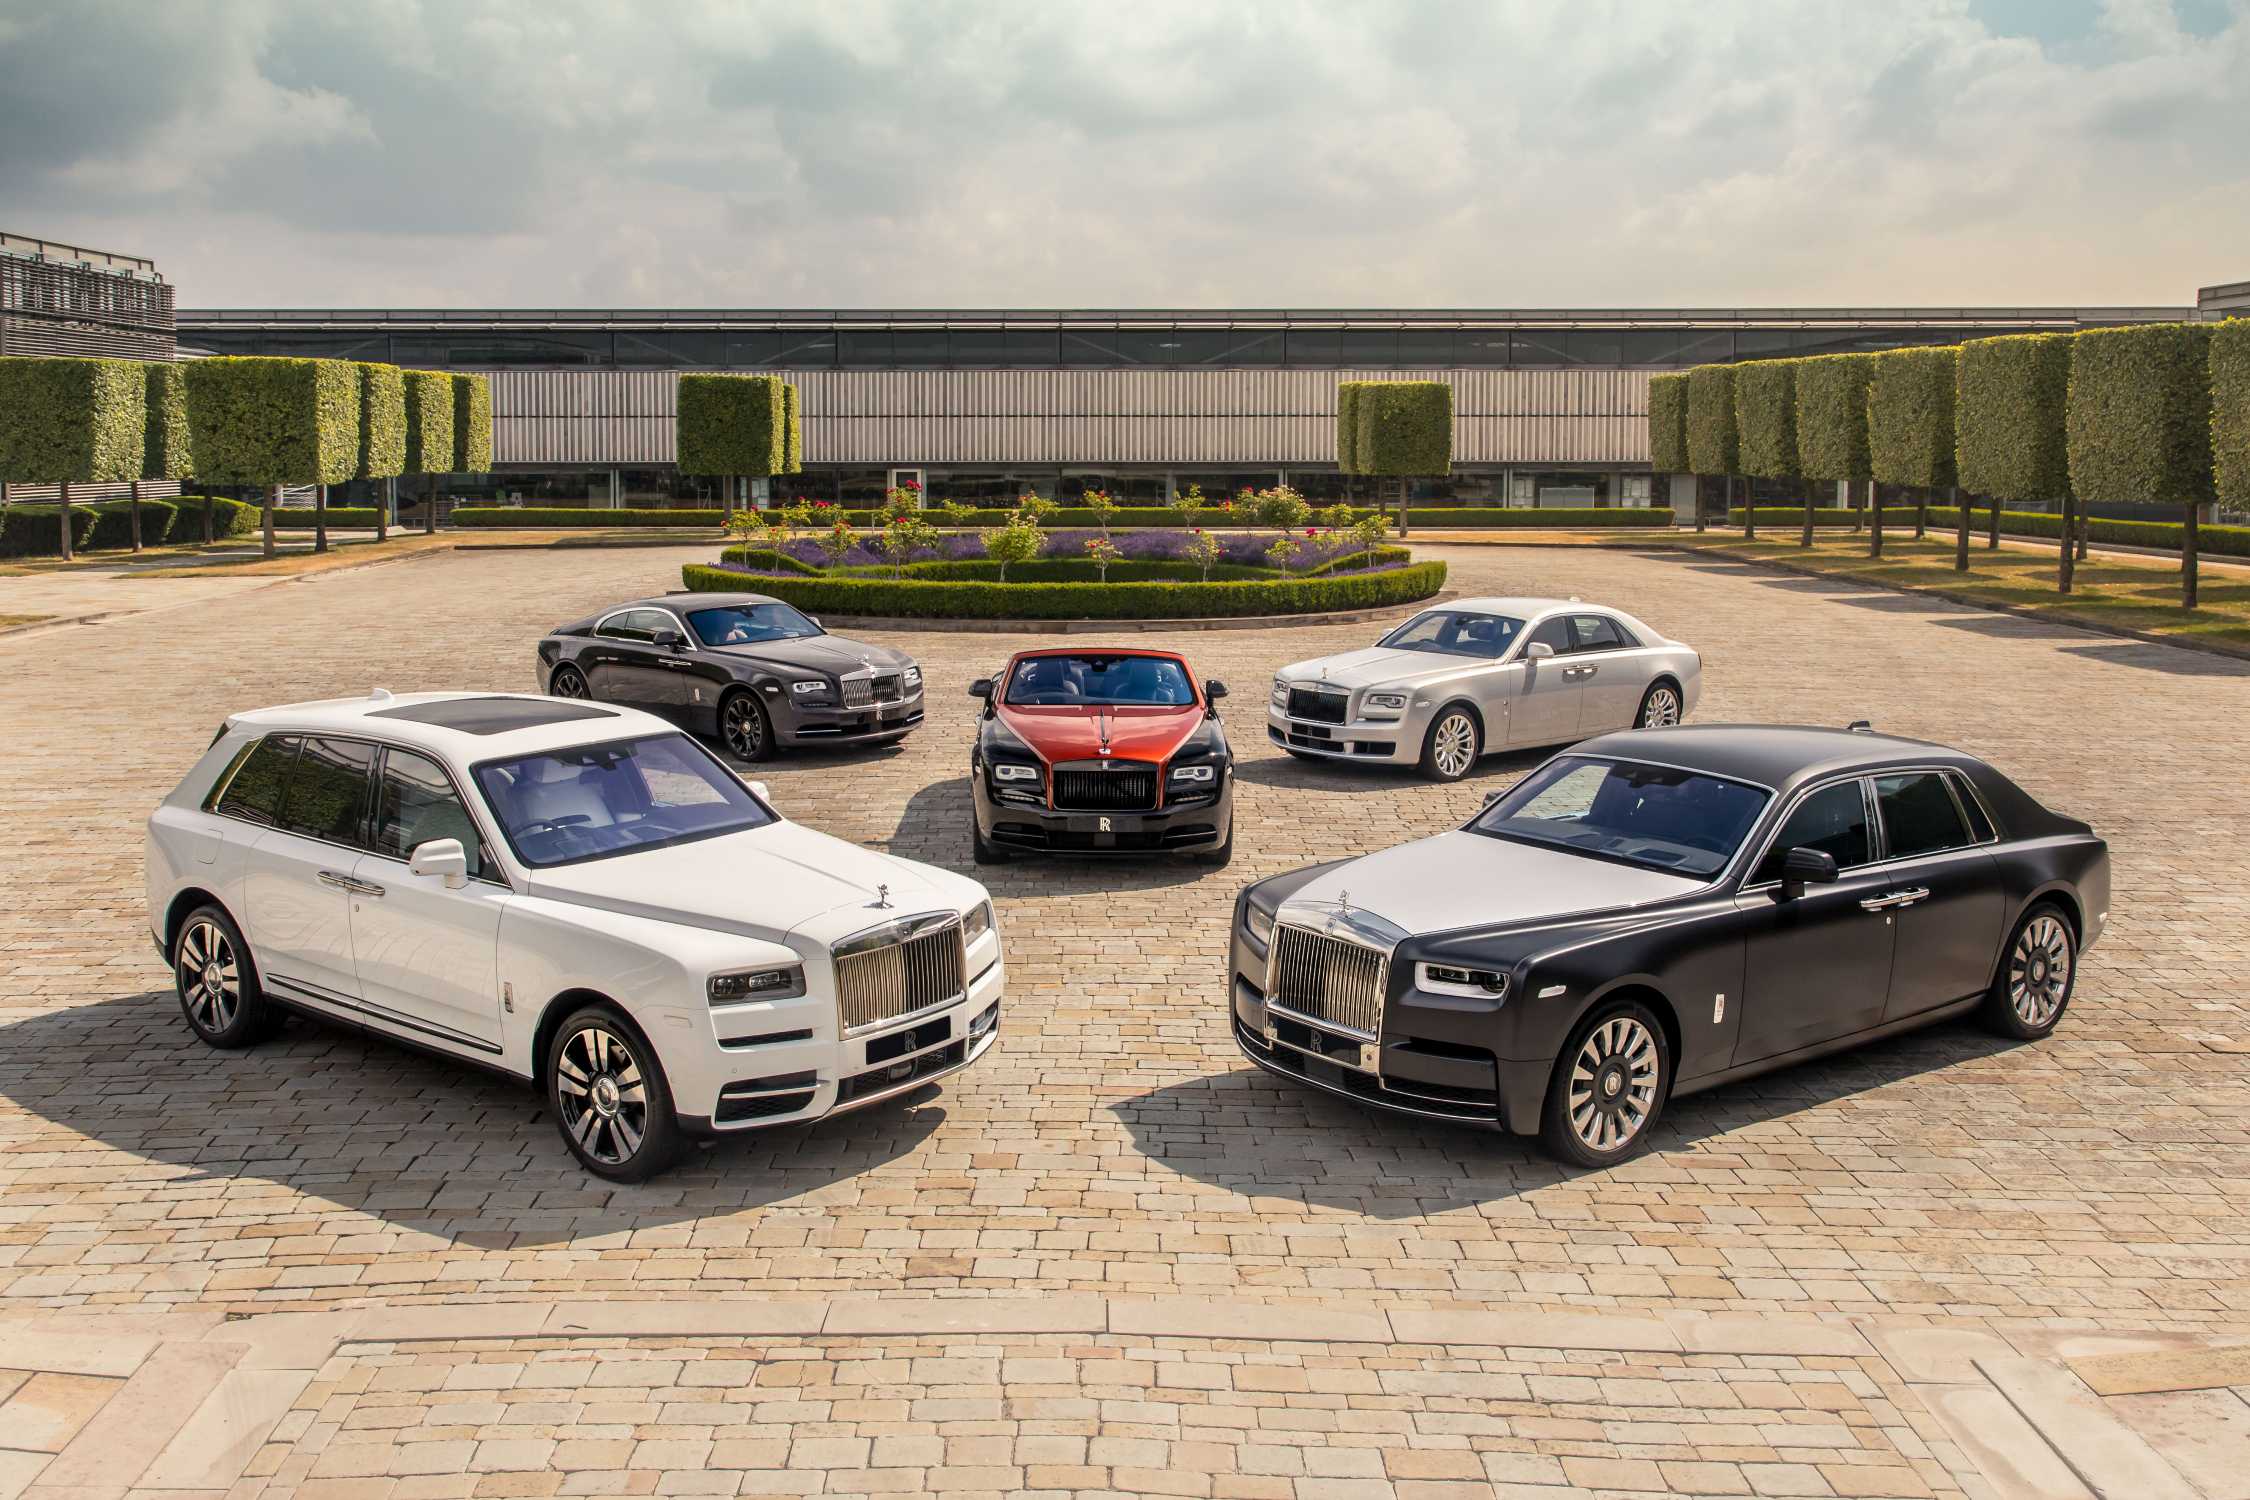 RollsRoyce Sold 5586 Vehicles in 2021 and It Was an AllTime Record   autoevolution